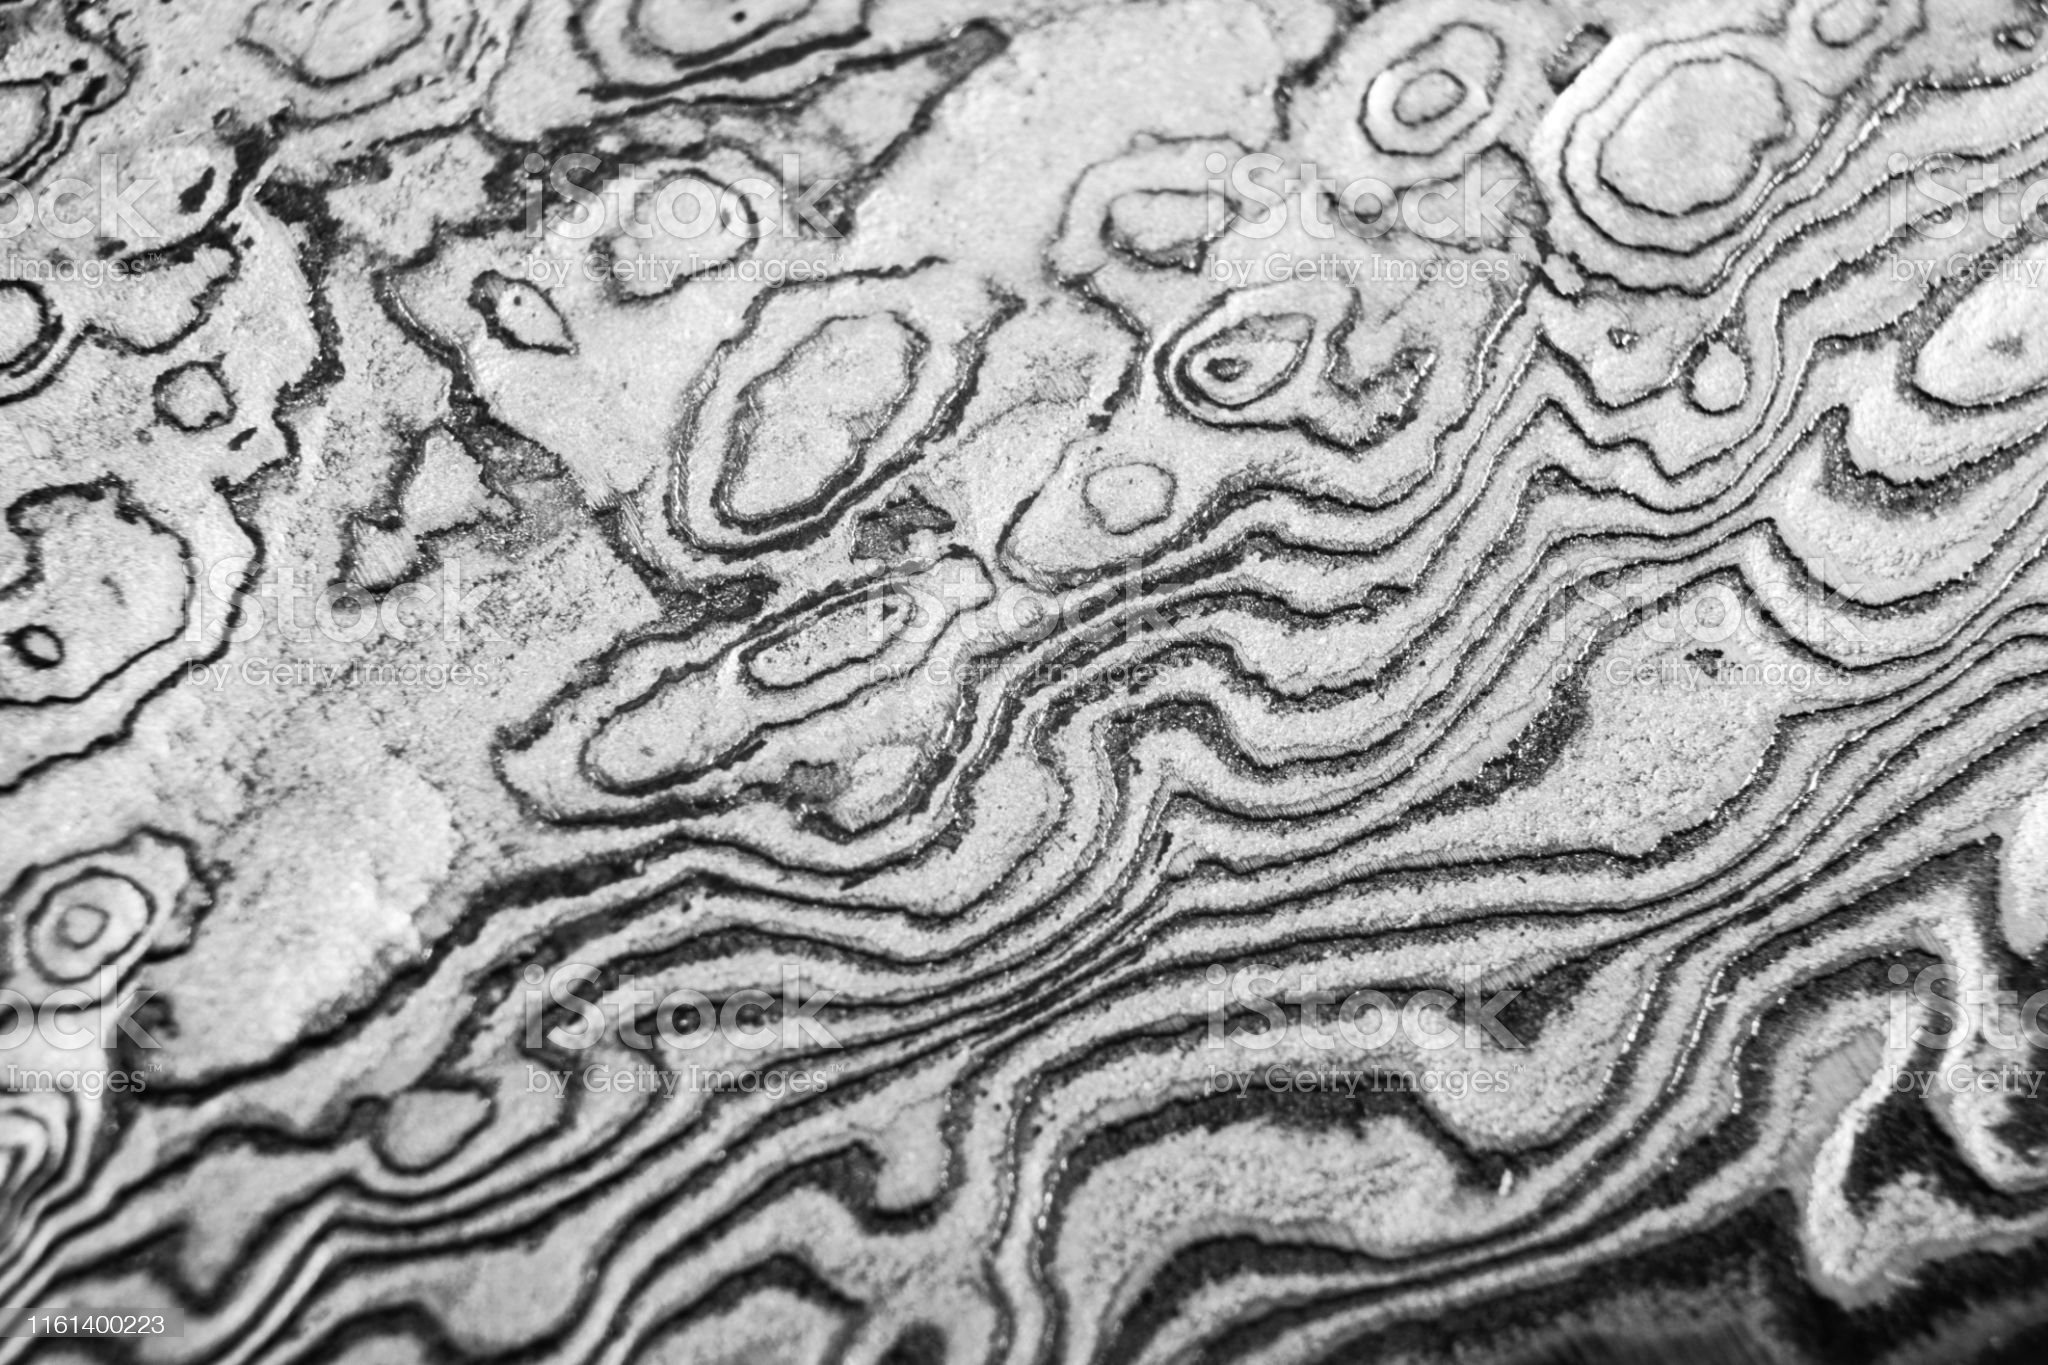 Background With Pattern Of Damask Steel Close Up Macro Shot Of A Damascus Knife Blade Texture Damascus Steel Pattern Metal And Steel Background Damascus Steel With Original Pattern Black And White Stock